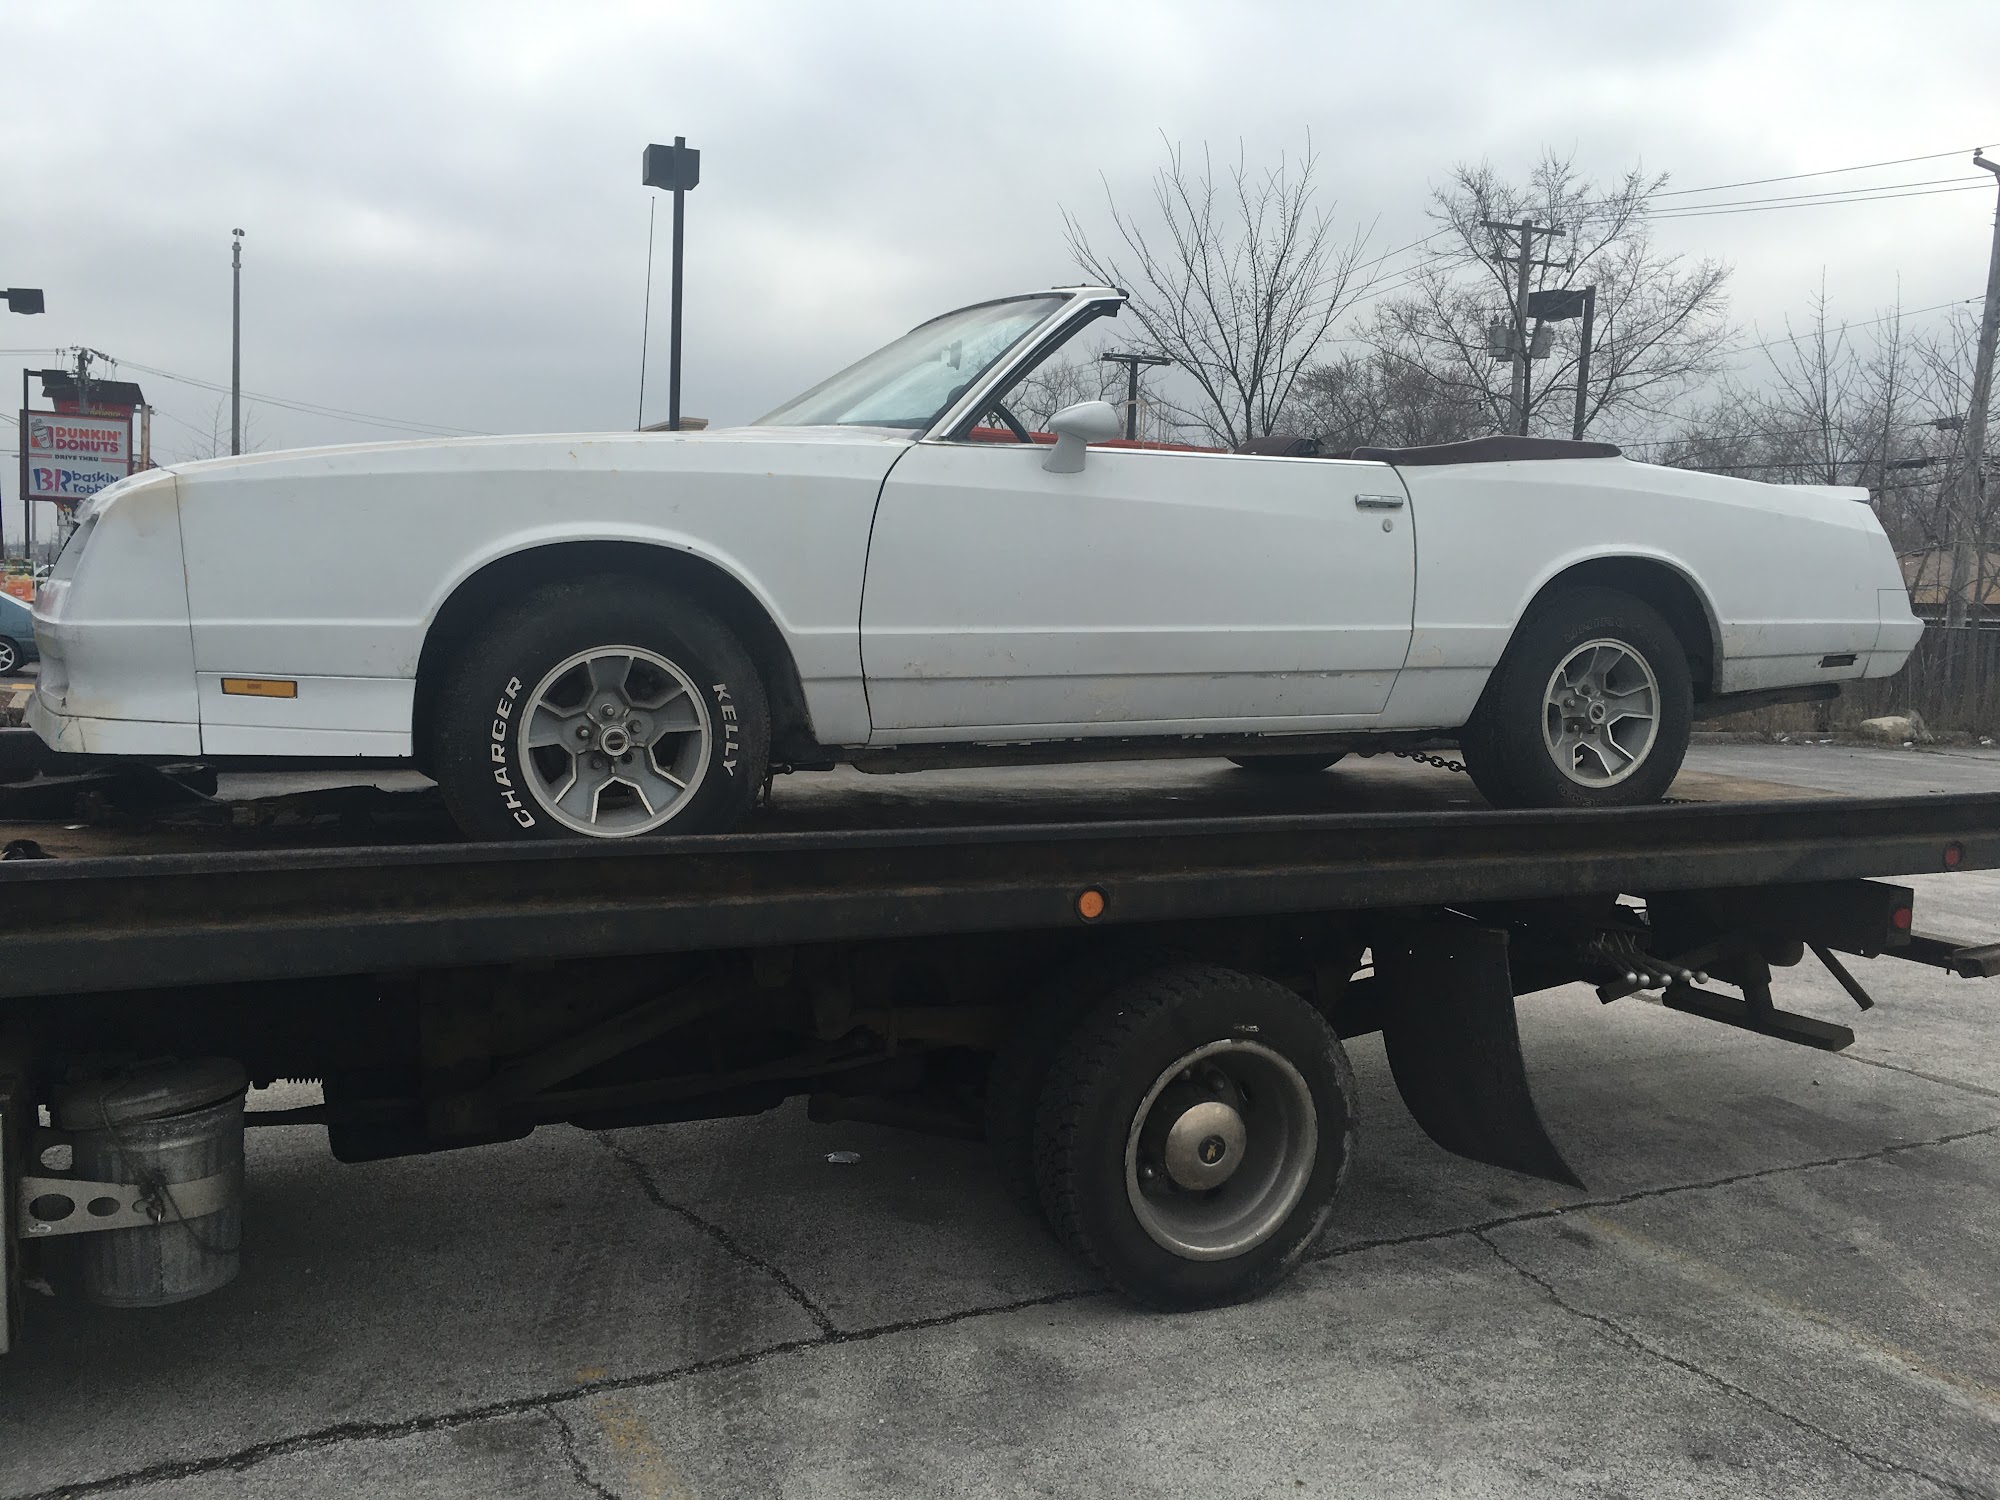 Manns Towing Service 12326 S Halsted St, Calumet Park Illinois 60827